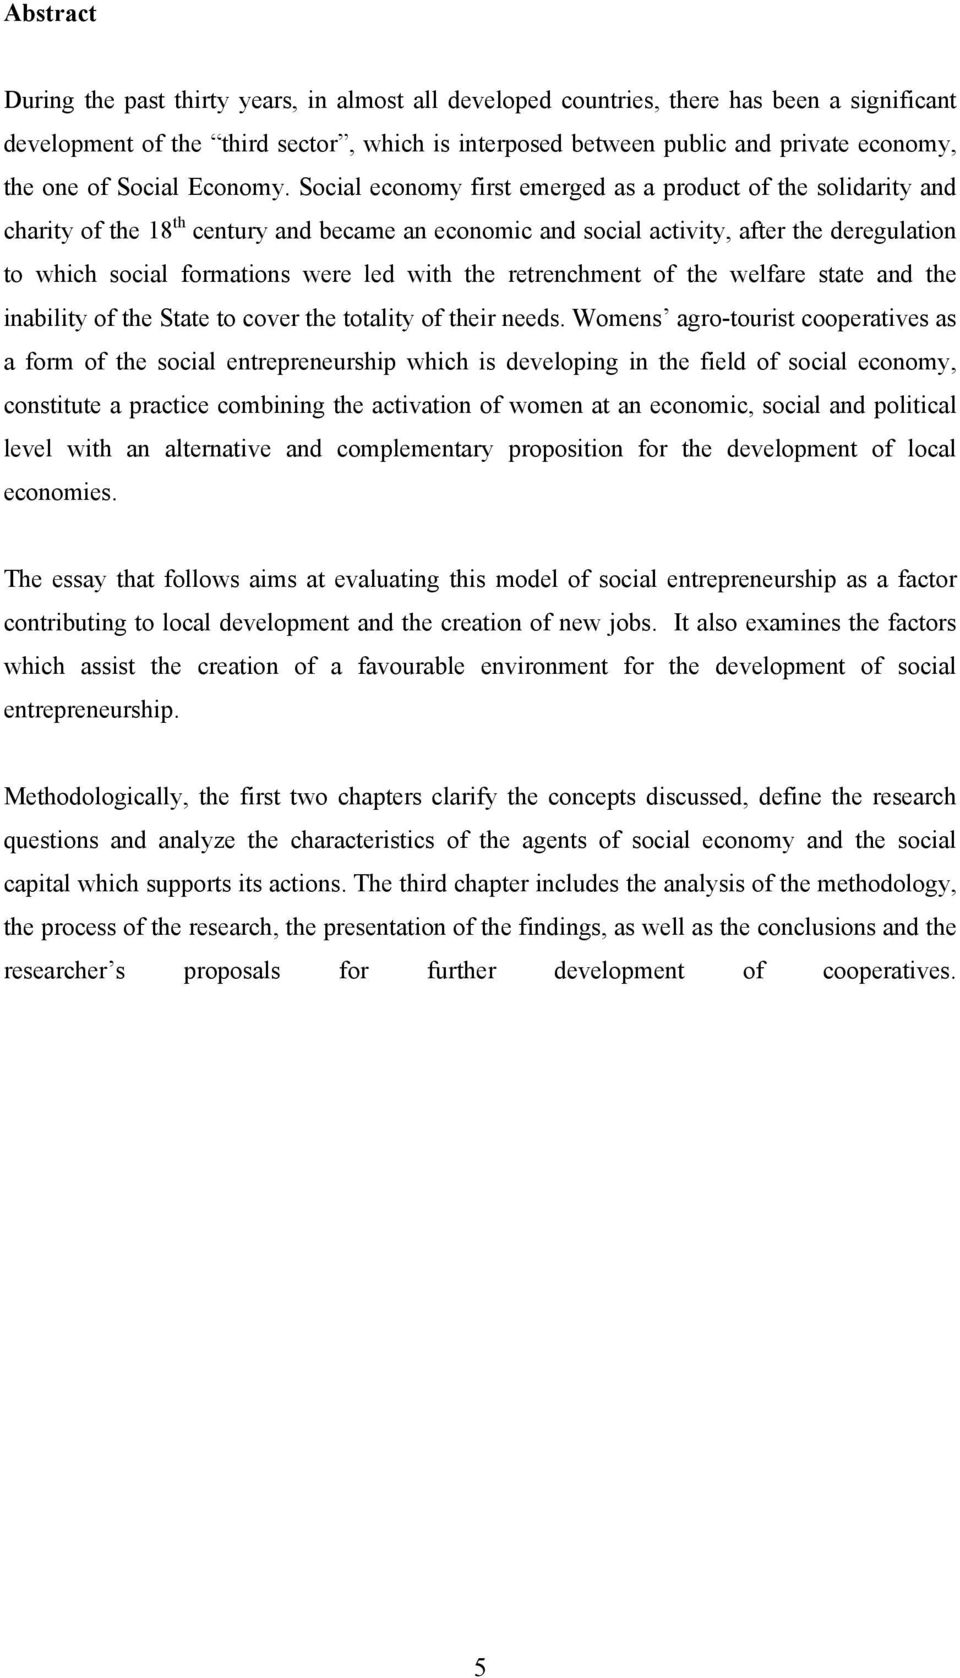 Social economy first emerged as a product of the solidarity and charity of the 18 th century and became an economic and social activity, after the deregulation to which social formations were led